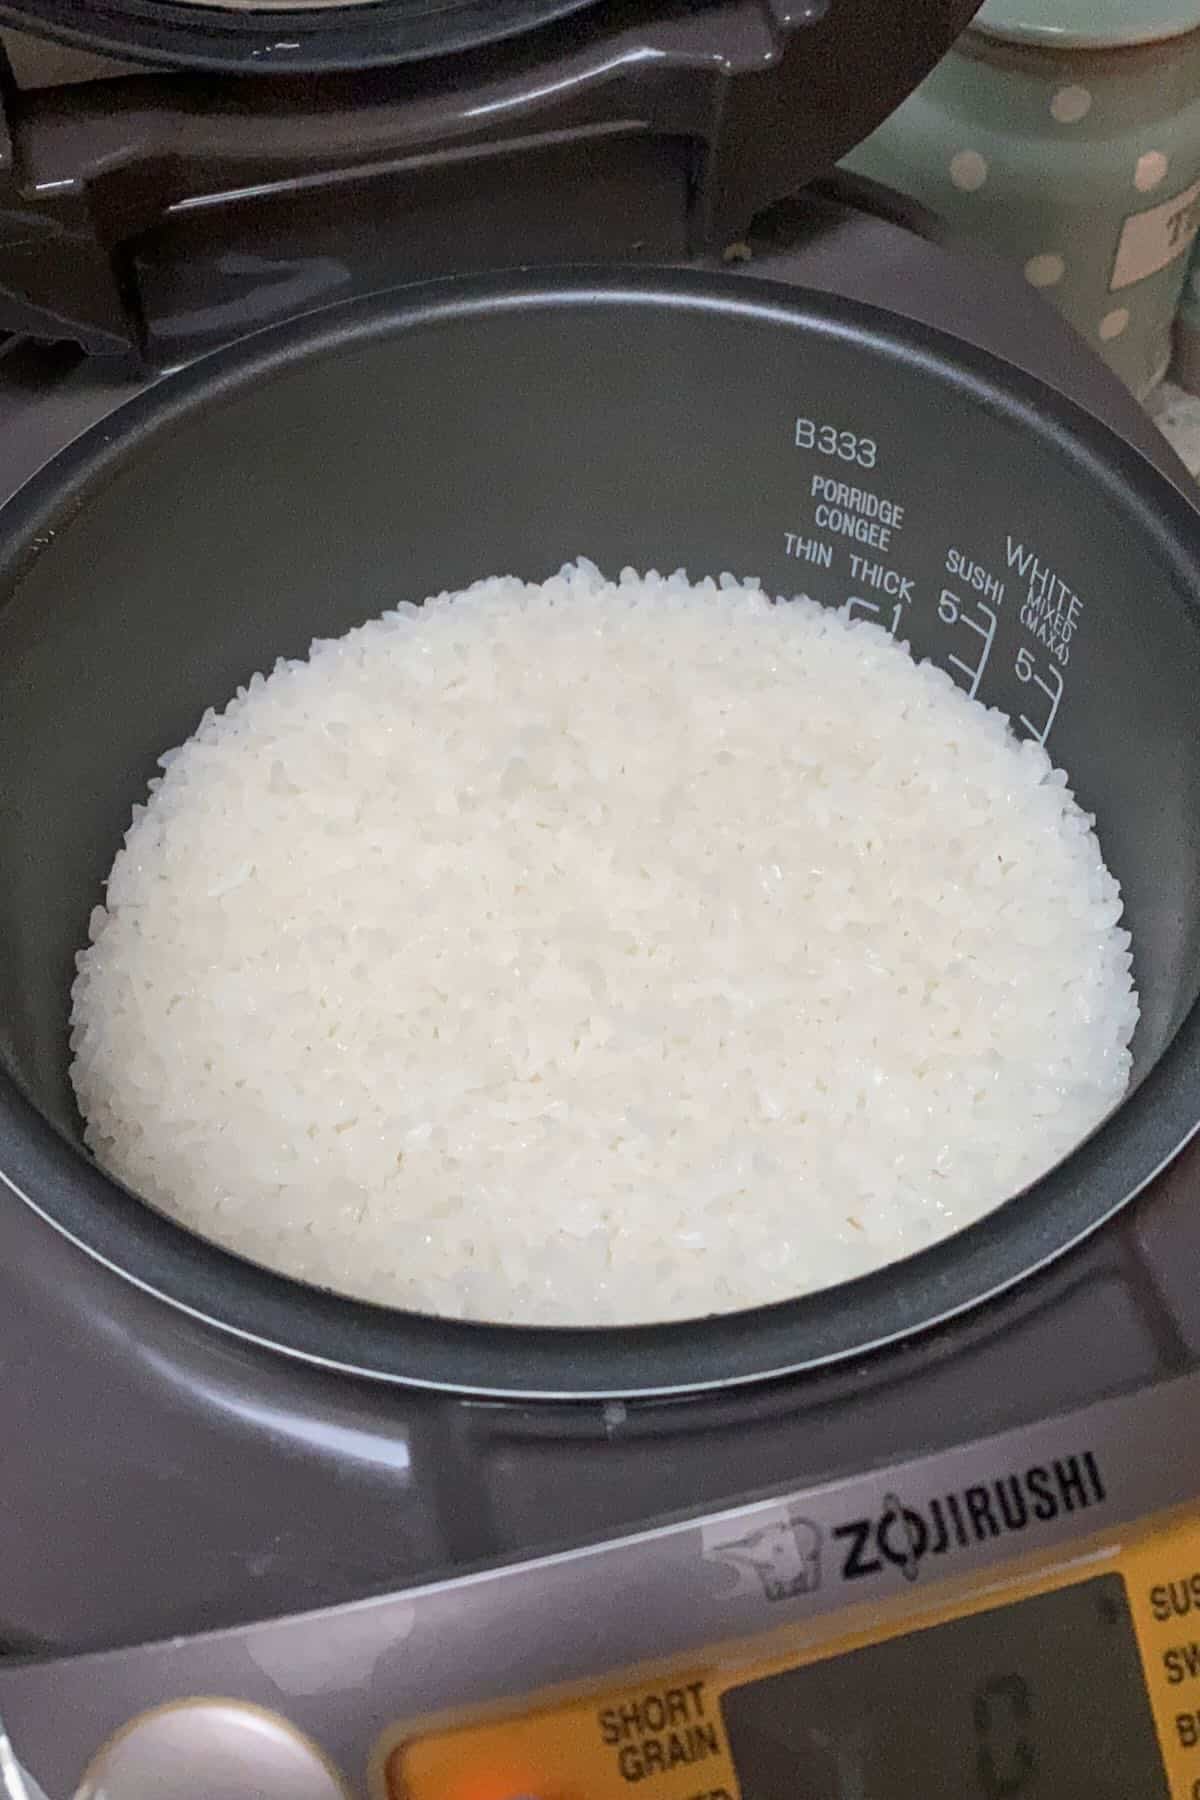 https://www.alphafoodie.com/wp-content/uploads/2022/01/Sushi-Rice-Cooked-rice-in-a-rice-cooker.jpeg